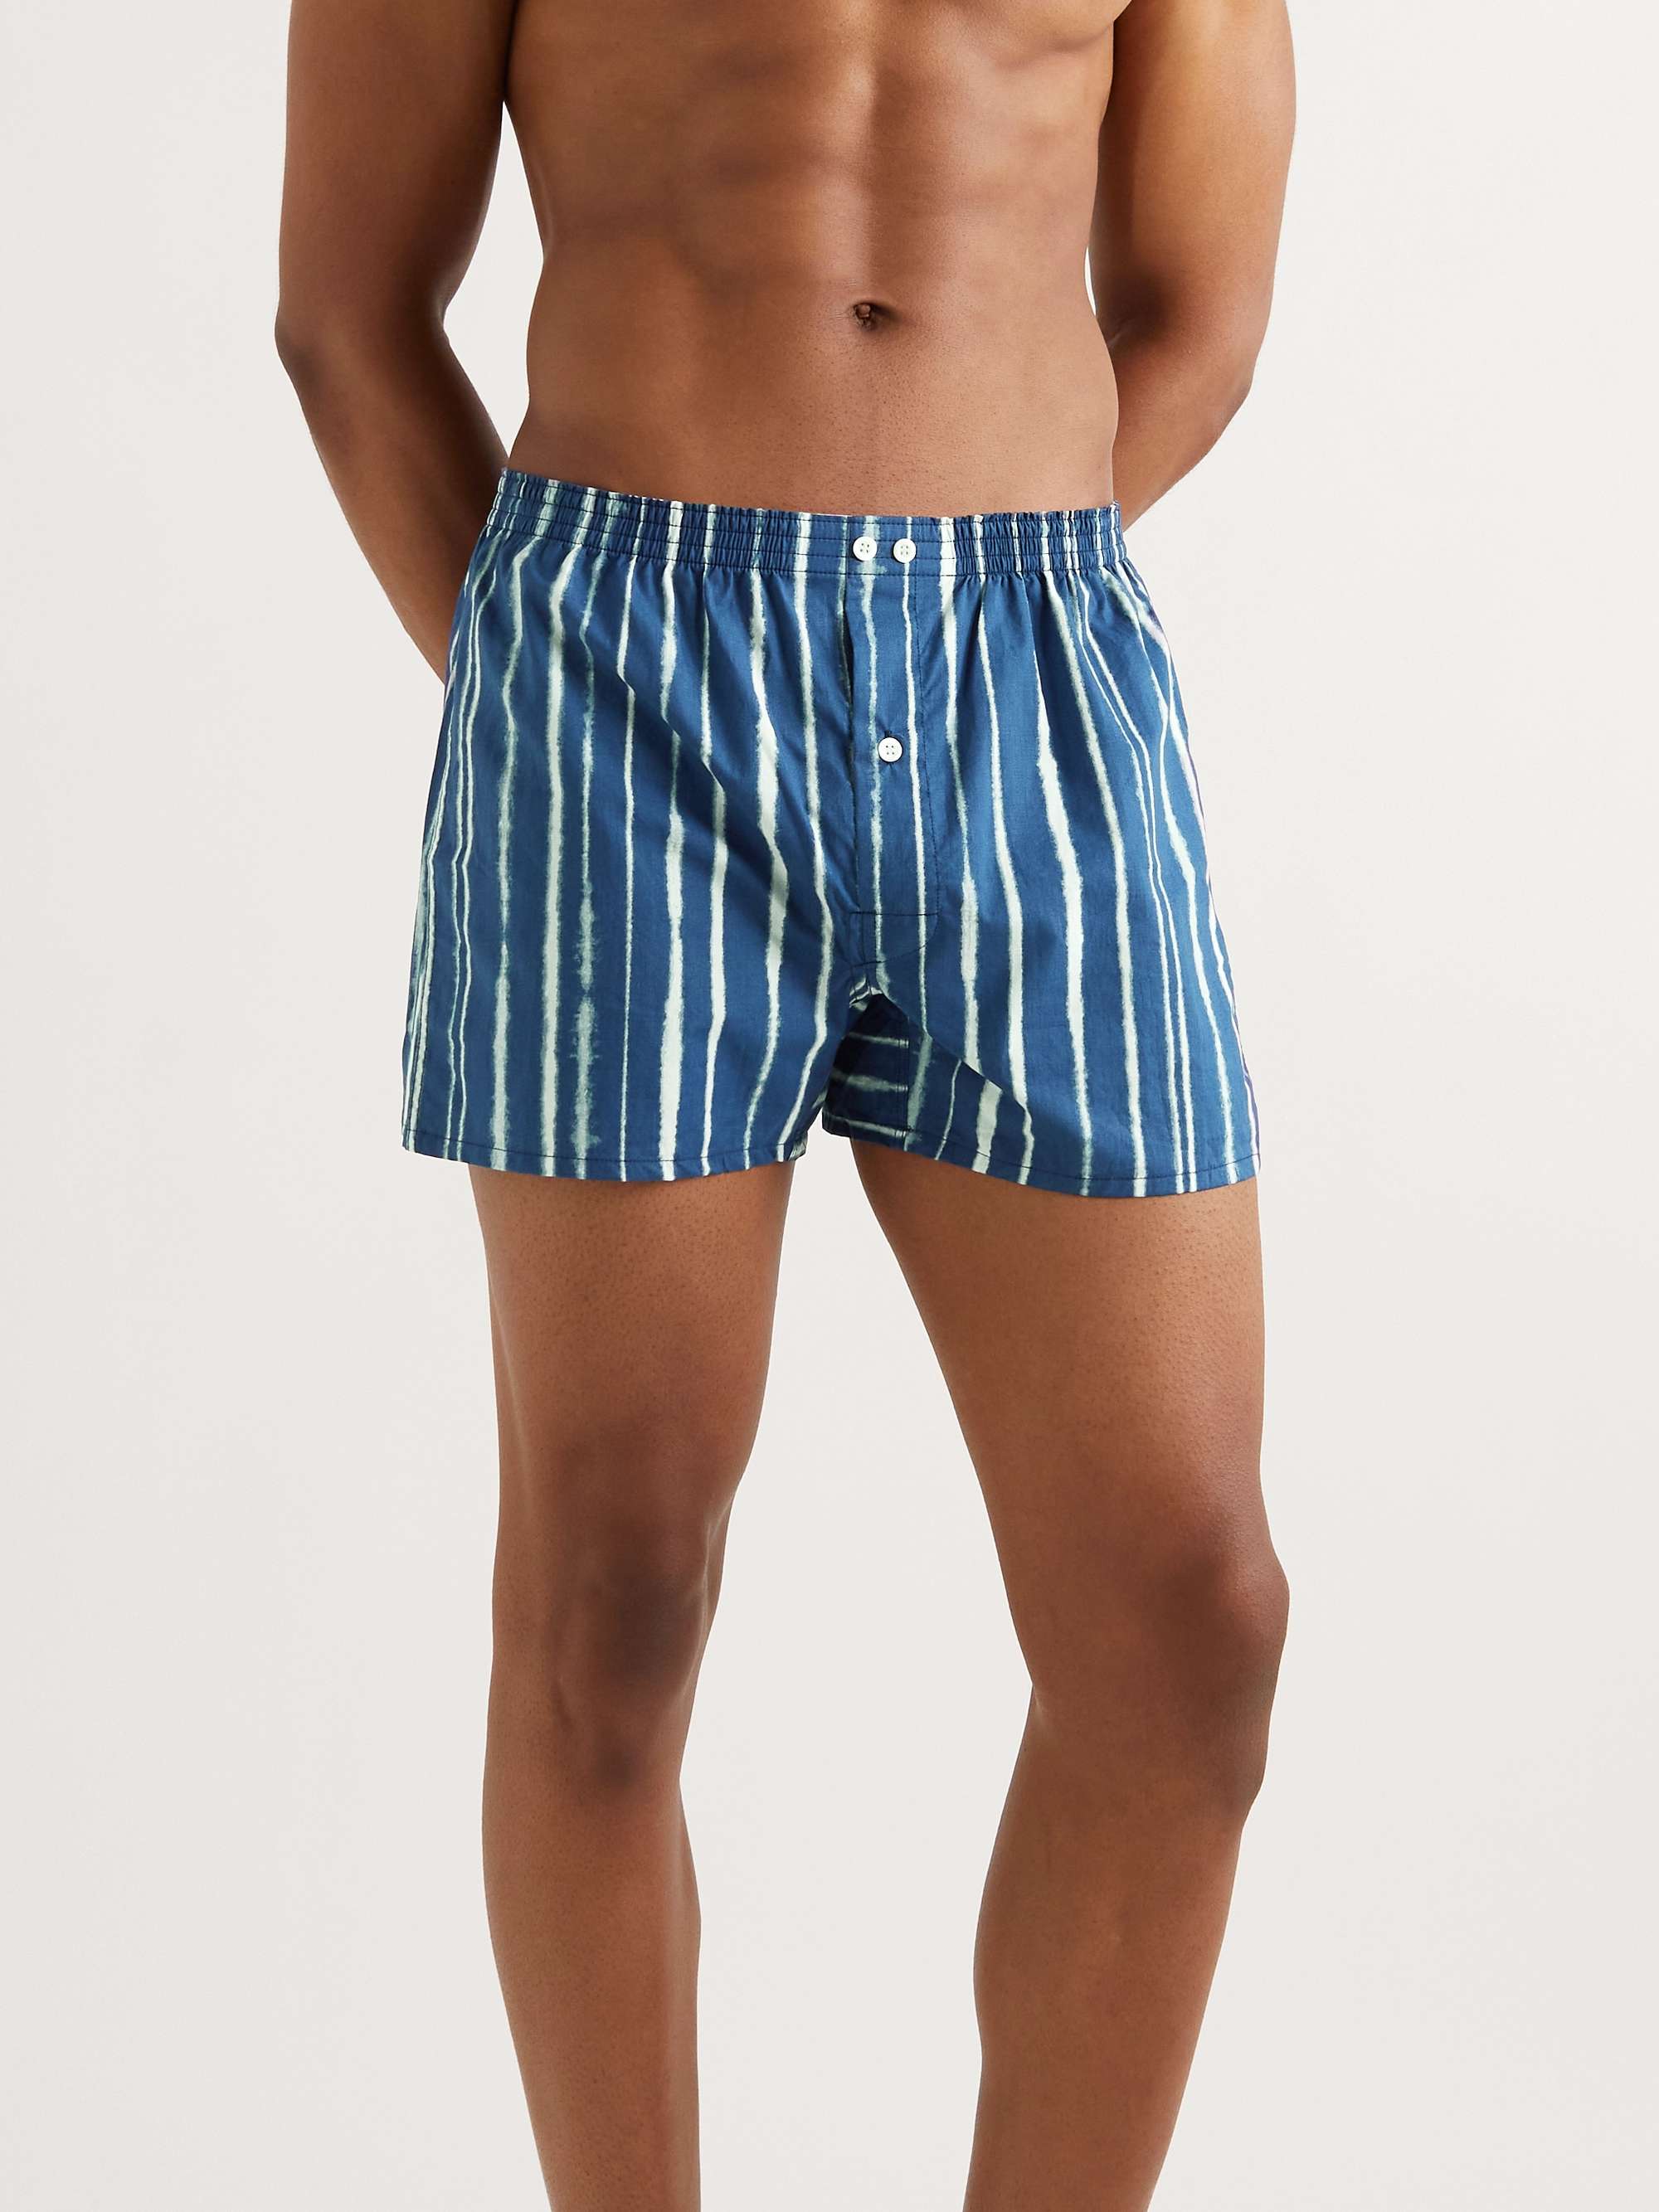 ANONYMOUS ISM Slim-Fit Striped Cotton Boxer Shorts